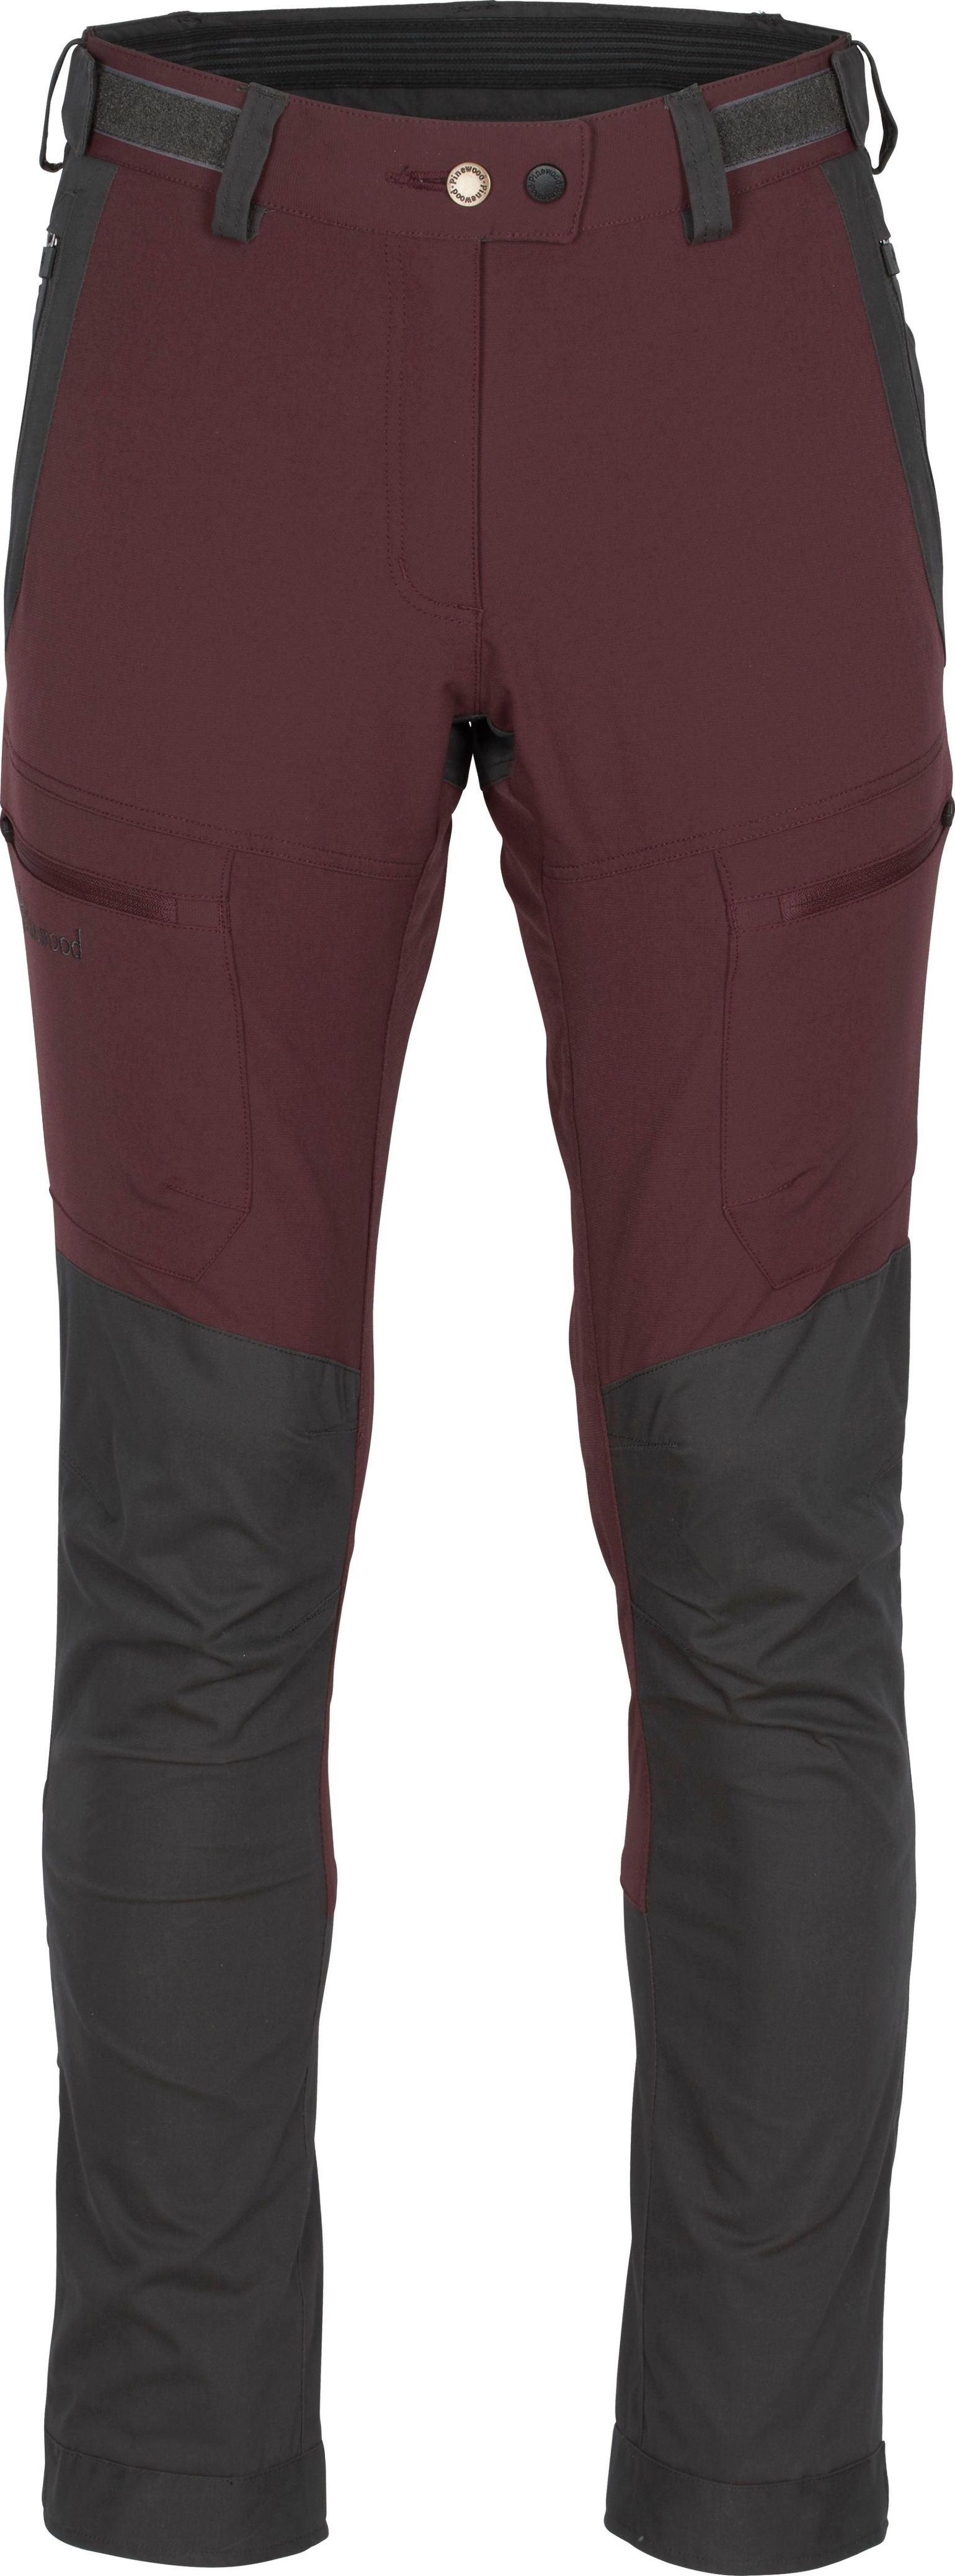 Women's Finnveden Hybrid Extreme Trousers Earthplum/D.Anthraci